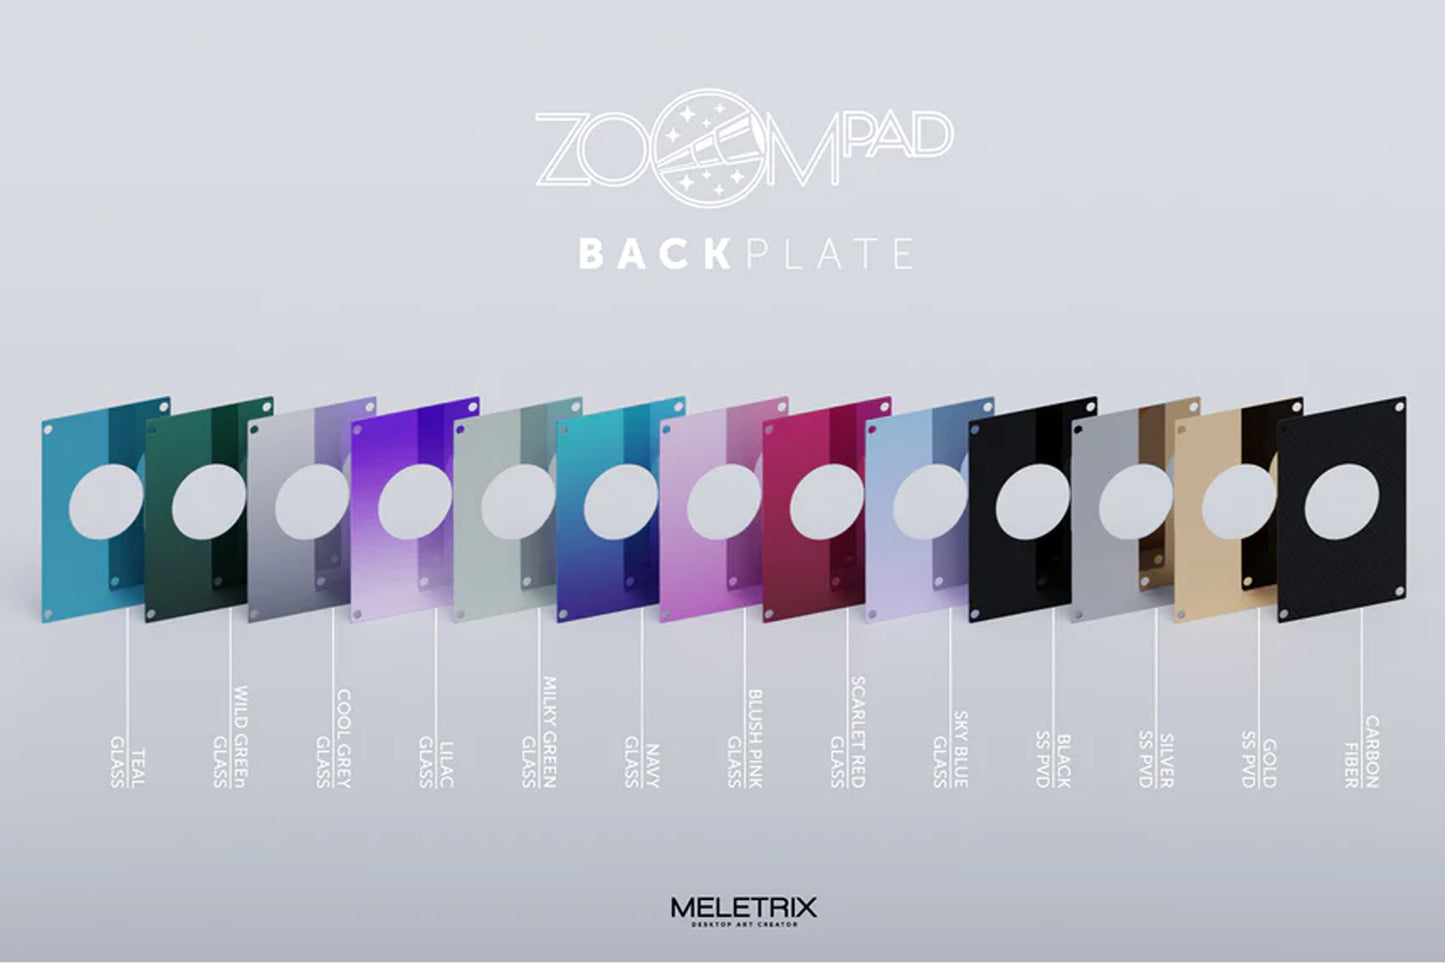 [Group-Buy] Meletrix ZoomPad  - Extra Back Plate [Air Shipping]